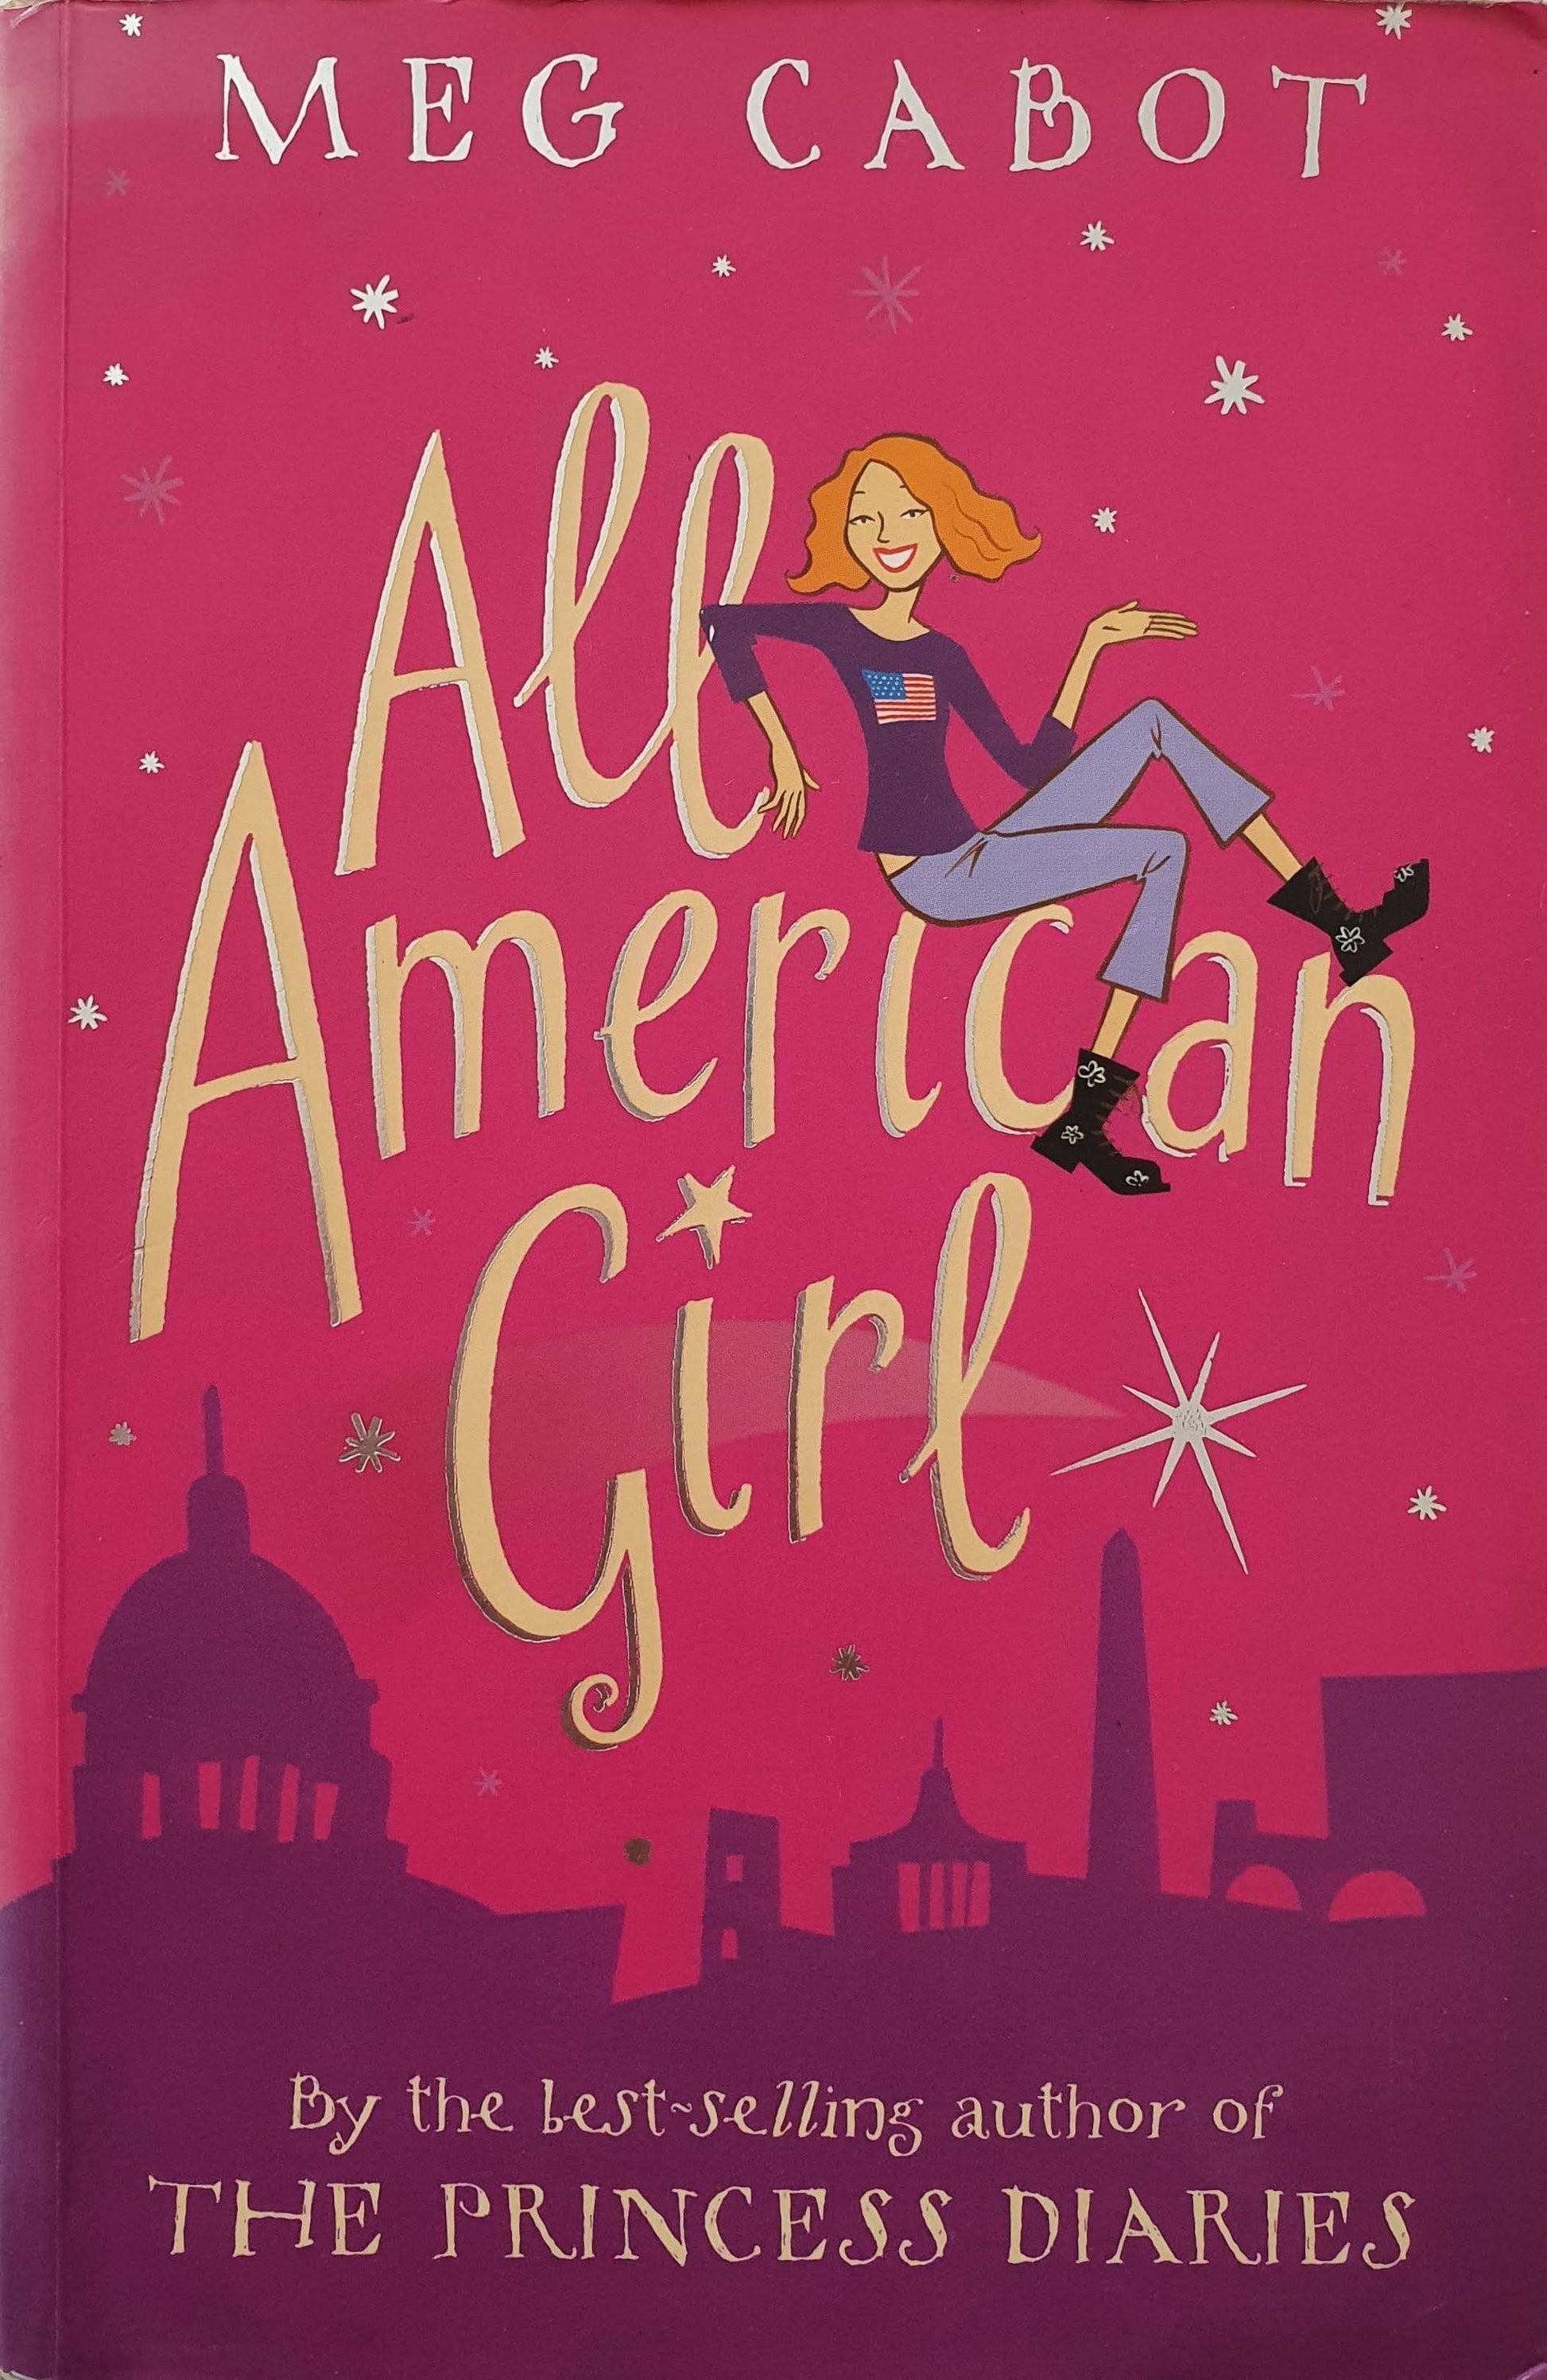 All about American Girl Like New The Princess Diaries  (4601484410935)